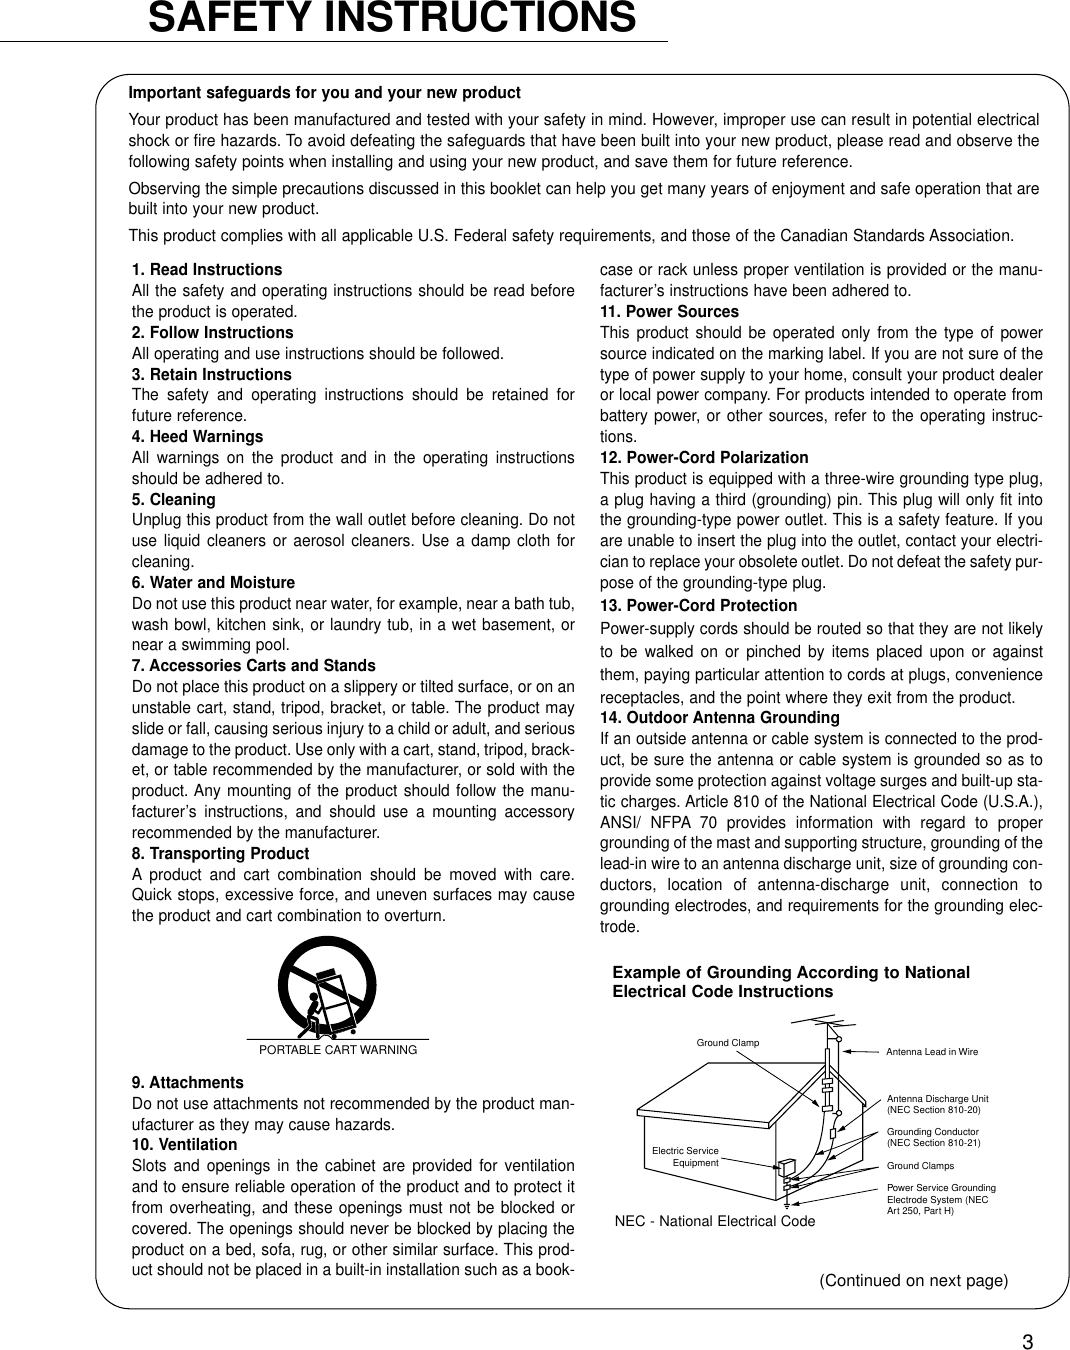 3Important safeguards for you and your new productYour product has been manufactured and tested with your safety in mind. However, improper use can result in potential electricalshock or fire hazards. To avoid defeating the safeguards that have been built into your new product, please read and observe thefollowing safety points when installing and using your new product, and save them for future reference.Observing the simple precautions discussed in this booklet can help you get many years of enjoyment and safe operation that arebuilt into your new product.This product complies with all applicable U.S. Federal safety requirements, and those of the Canadian Standards Association.1. Read InstructionsAll the safety and operating instructions should be read beforethe product is operated.2. Follow InstructionsAll operating and use instructions should be followed.3. Retain InstructionsThe safety and operating instructions should be retained forfuture reference.4. Heed WarningsAll warnings on the product and in the operating instructionsshould be adhered to.5. CleaningUnplug this product from the wall outlet before cleaning. Do notuse liquid cleaners or aerosol cleaners. Use a damp cloth forcleaning.6. Water and MoistureDo not use this product near water, for example, near a bath tub,wash bowl, kitchen sink, or laundry tub, in a wet basement, ornear a swimming pool.7. Accessories Carts and StandsDo not place this product on a slippery or tilted surface, or on anunstable cart, stand, tripod, bracket, or table. The product mayslide or fall, causing serious injury to a child or adult, and seriousdamage to the product. Use only with a cart, stand, tripod, brack-et, or table recommended by the manufacturer, or sold with theproduct. Any mounting of the product should follow the manu-facturer’s instructions, and should use a mounting accessoryrecommended by the manufacturer.8. Transporting ProductA product and cart combination should be moved with care.Quick stops, excessive force, and uneven surfaces may causethe product and cart combination to overturn.9. AttachmentsDo not use attachments not recommended by the product man-ufacturer as they may cause hazards.10. VentilationSlots and openings in the cabinet are provided for ventilationand to ensure reliable operation of the product and to protect itfrom overheating, and these openings must not be blocked orcovered. The openings should never be blocked by placing theproduct on a bed, sofa, rug, or other similar surface. This prod-uct should not be placed in a built-in installation such as a book-case or rack unless proper ventilation is provided or the manu-facturer’s instructions have been adhered to.11. Power SourcesThis product should be operated only from the type of powersource indicated on the marking label. If you are not sure of thetype of power supply to your home, consult your product dealeror local power company. For products intended to operate frombattery power, or other sources, refer to the operating instruc-tions.12. Power-Cord PolarizationThis product is equipped with a three-wire grounding type plug,a plug having a third (grounding) pin. This plug will only fit intothe grounding-type power outlet. This is a safety feature. If youare unable to insert the plug into the outlet, contact your electri-cian to replace your obsolete outlet. Do not defeat the safety pur-pose of the grounding-type plug.13. Power-Cord ProtectionPower-supply cords should be routed so that they are not likelyto be walked on or pinched by items placed upon or againstthem, paying particular attention to cords at plugs, conveniencereceptacles, and the point where they exit from the product.14. Outdoor Antenna GroundingIf an outside antenna or cable system is connected to the prod-uct, be sure the antenna or cable system is grounded so as toprovide some protection against voltage surges and built-up sta-tic charges. Article 810 of the National Electrical Code (U.S.A.),ANSI/ NFPA 70 provides information with regard to propergrounding of the mast and supporting structure, grounding of thelead-in wire to an antenna discharge unit, size of grounding con-ductors, location of antenna-discharge unit, connection togrounding electrodes, and requirements for the grounding elec-trode. PORTABLE CART WARNING(Continued on next page)SAFETY INSTRUCTIONSAntenna Lead in WireAntenna Discharge Unit(NEC Section 810-20)Grounding Conductor(NEC Section 810-21)Ground ClampsPower Service GroundingElectrode System (NECArt 250, Part H)Ground ClampElectric ServiceEquipmentExample of Grounding According to NationalElectrical Code InstructionsNEC - National Electrical Code